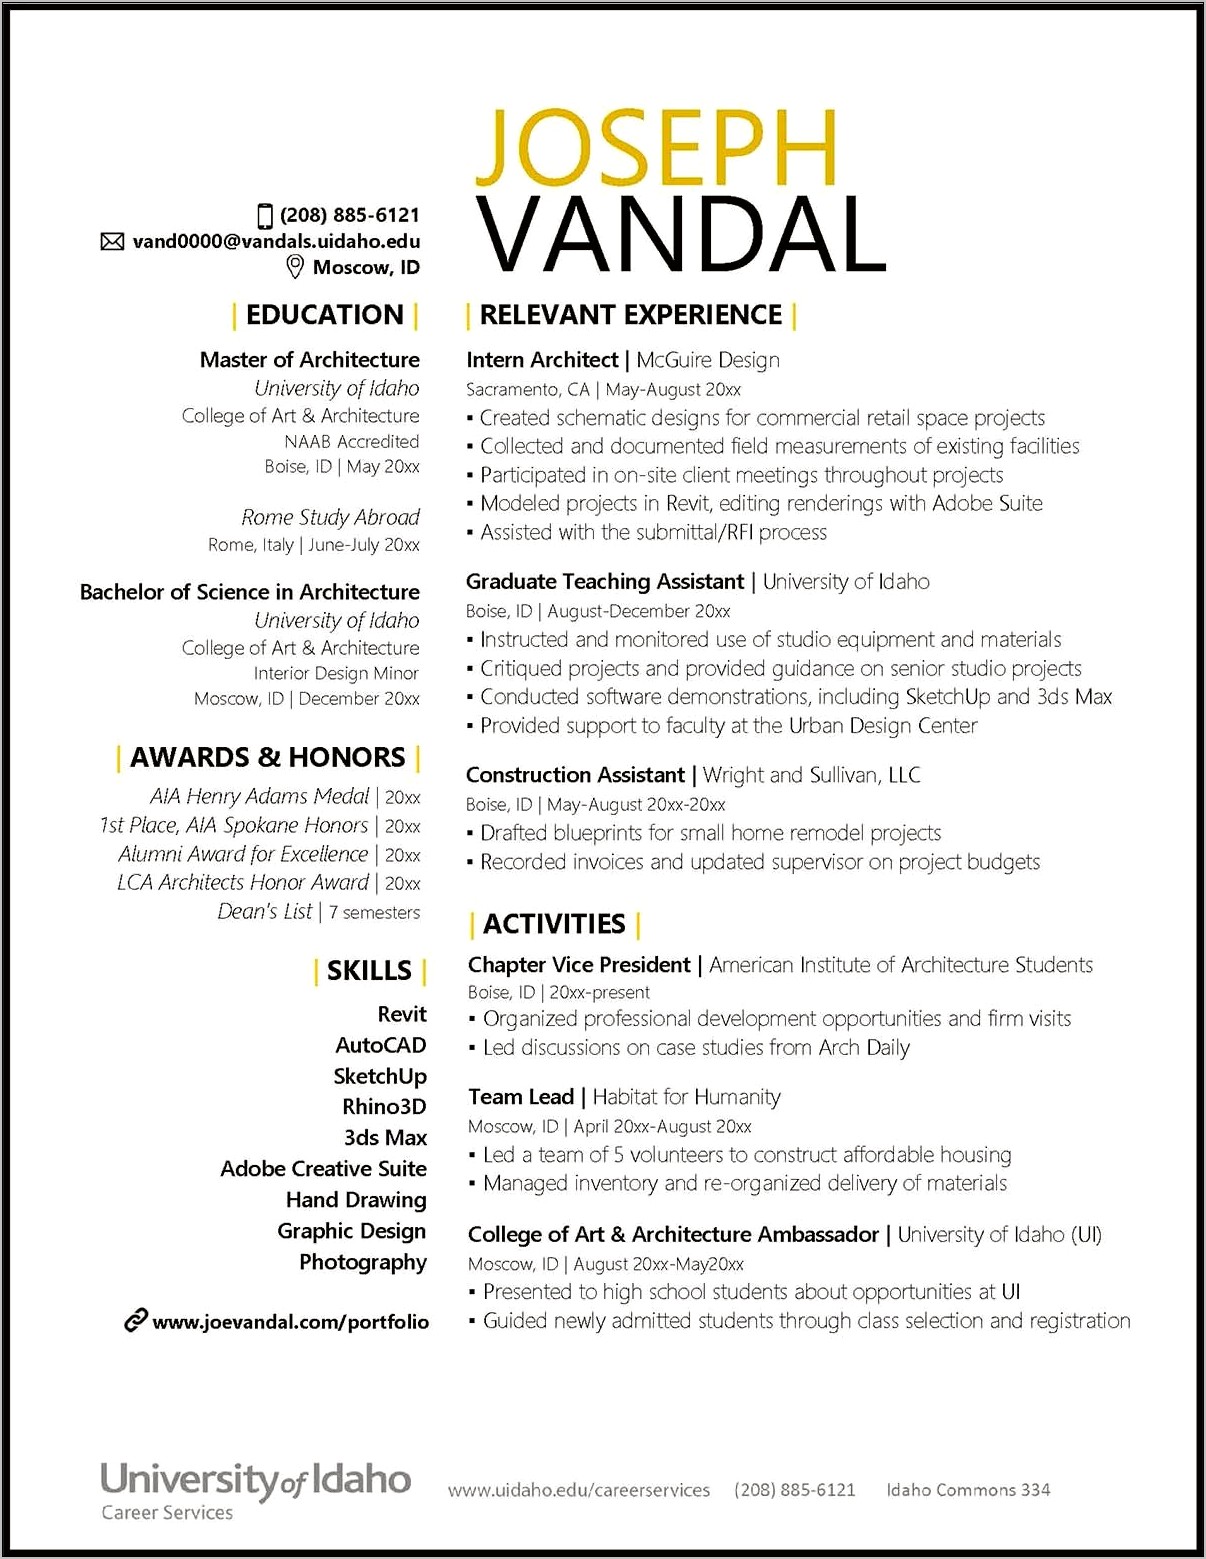 Sample Resume For Library Assistant